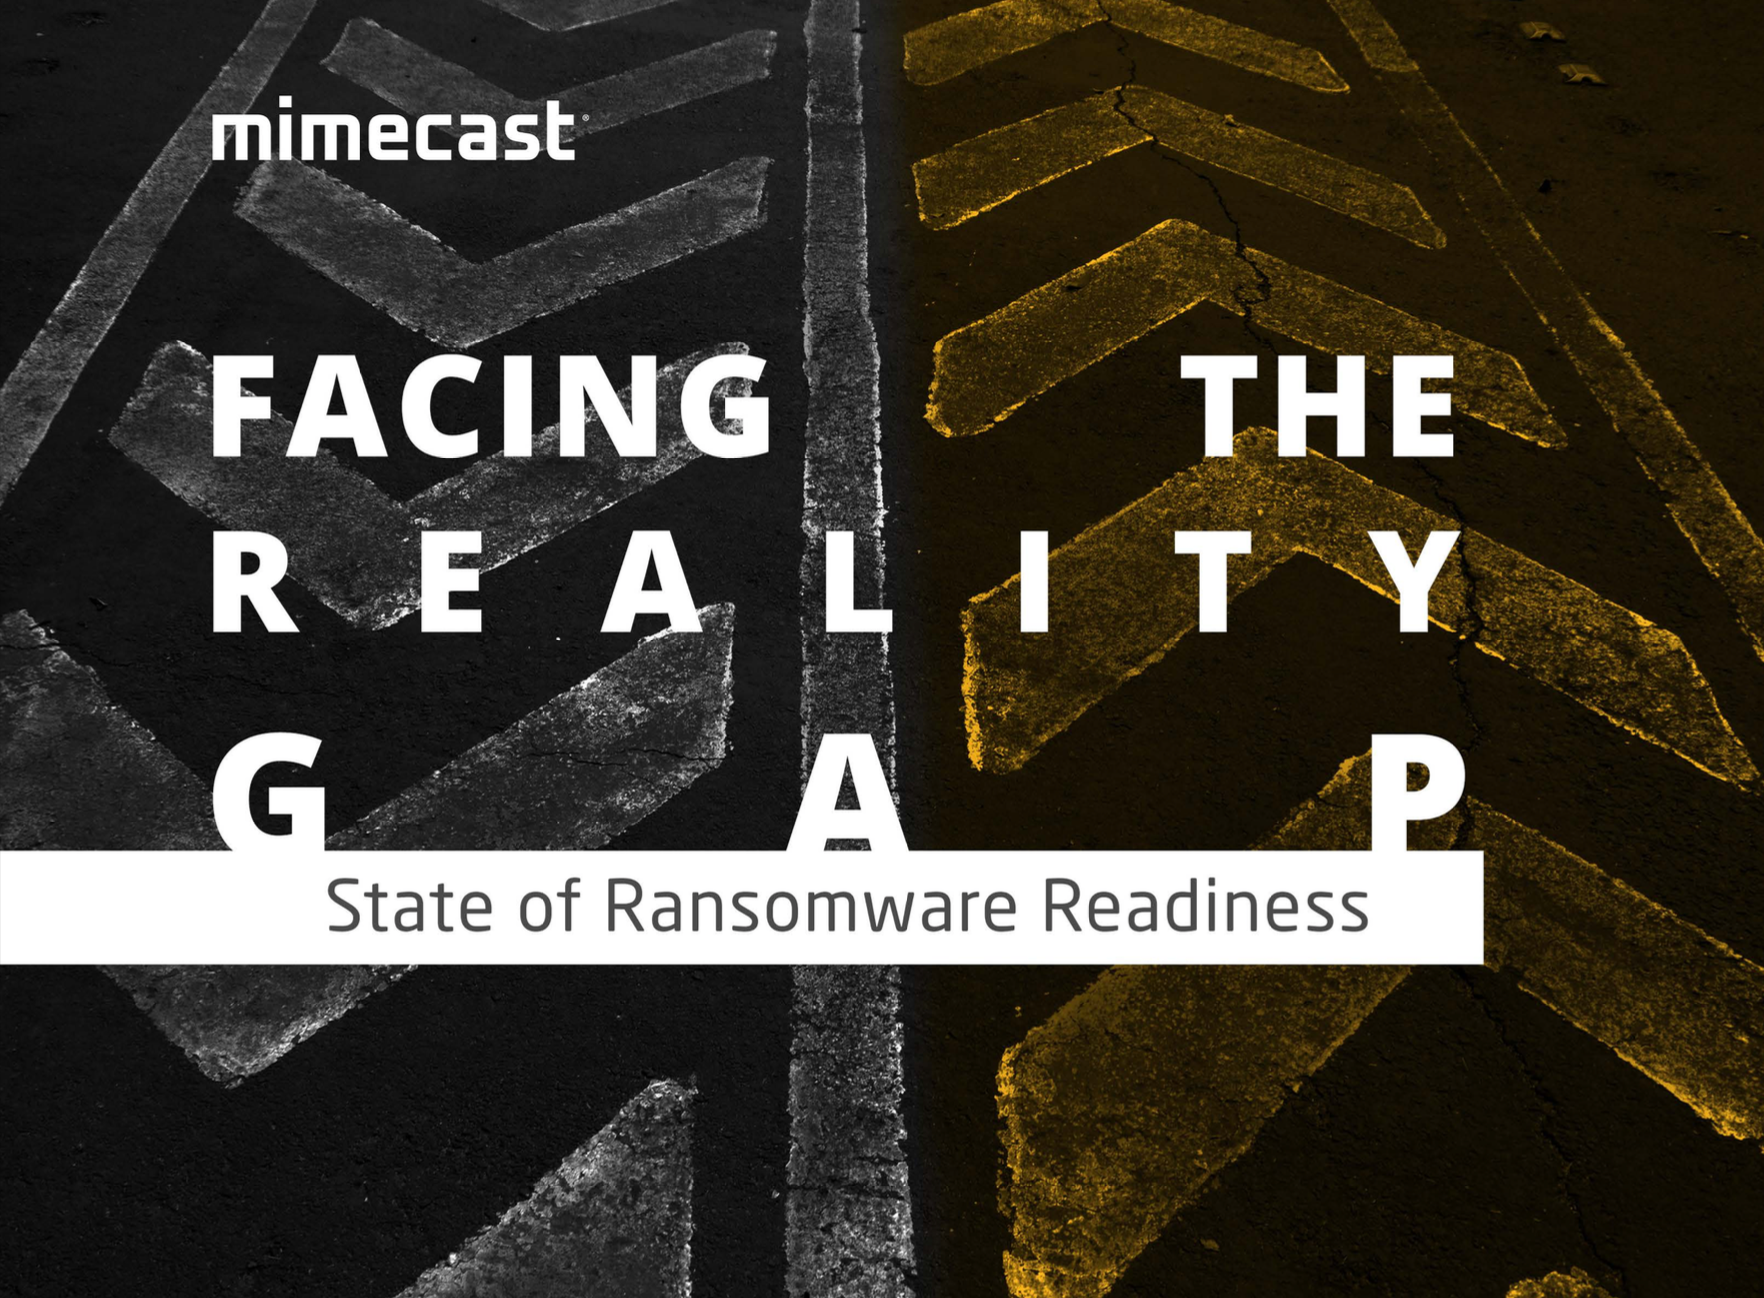 state-of-ransomware-readiness-report-mimecast-thumbnail.webp